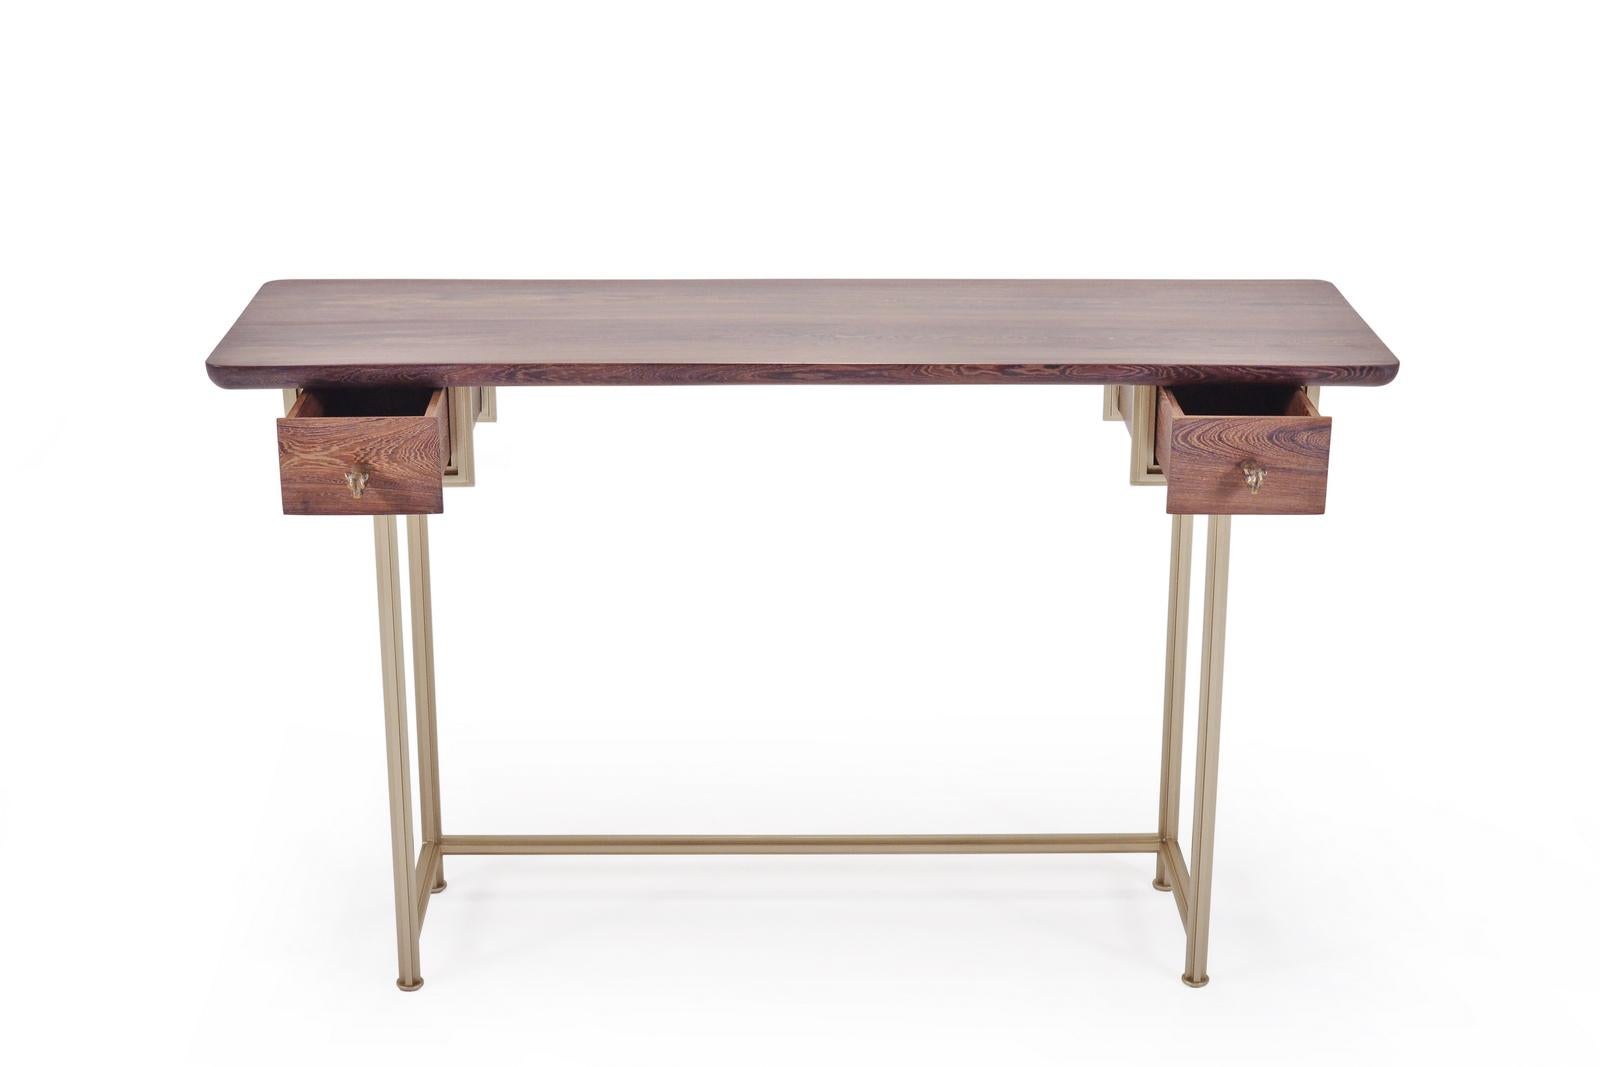 Bespoke Desk, Reclaimed Wood, Extruded Hand Weld Brass Frame, by P. Tendercool For Sale 2